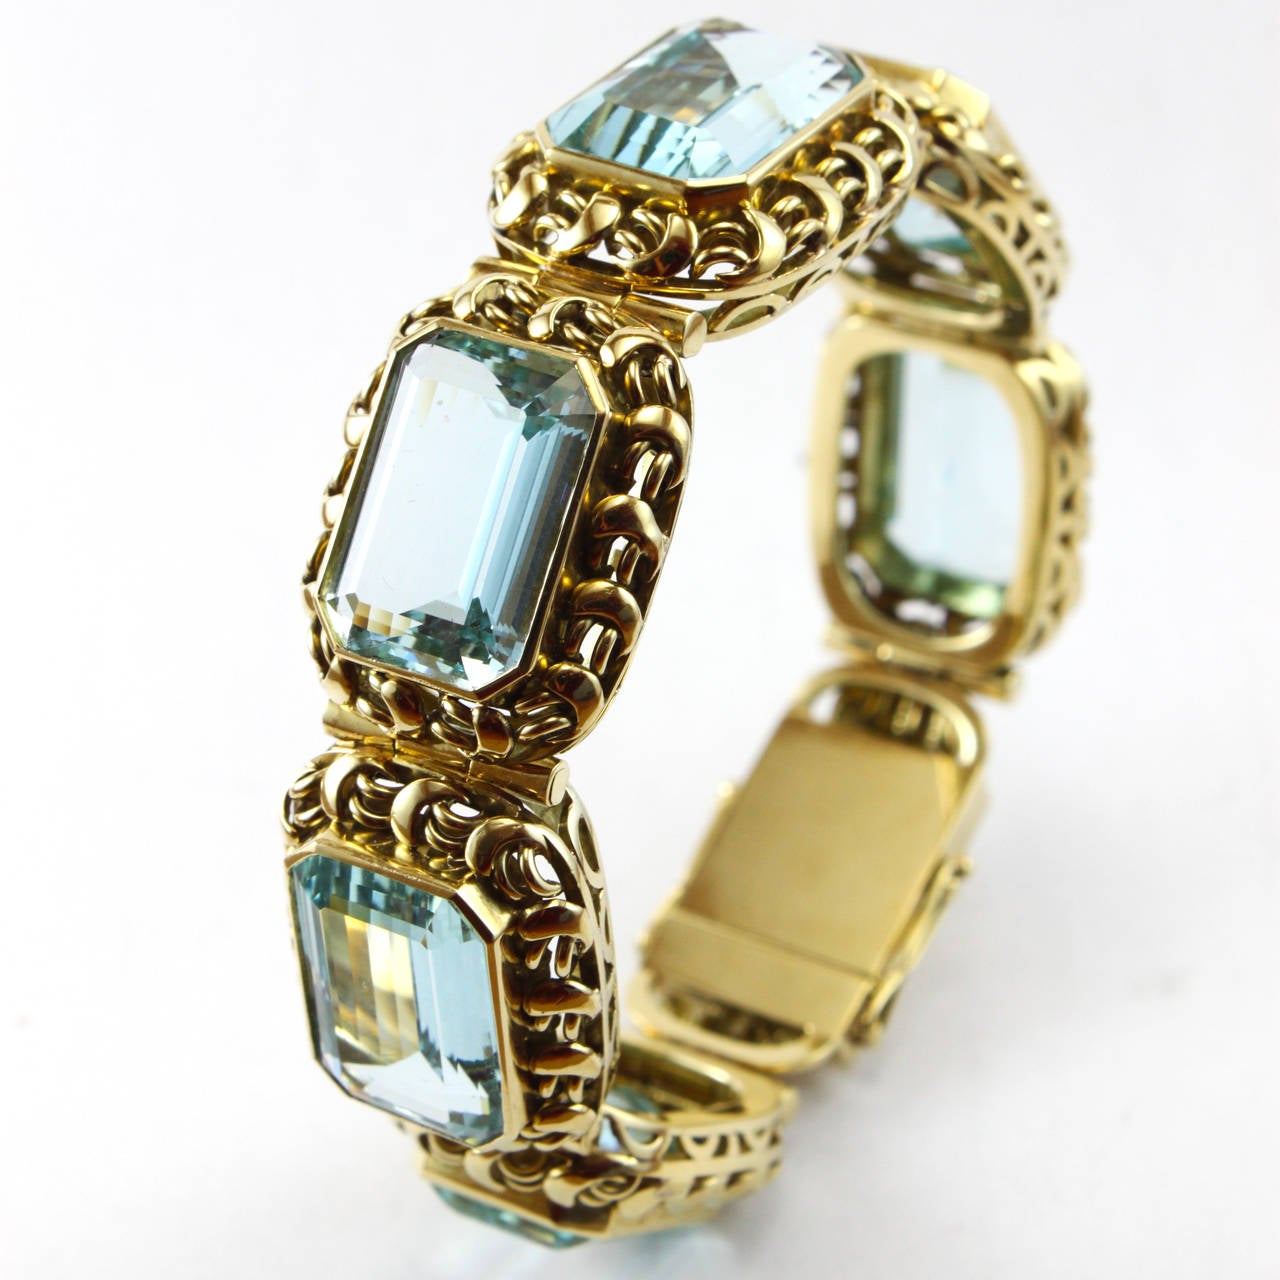 A bracelet in yellow gold with six large aquamarines throughout the bracelet - a perfect piece of jewellery for a blue dress/outfit. The total weight of the aquamarines is ca. 72 carats and it is mounted in 14k yellow gold. The secure clasp of the